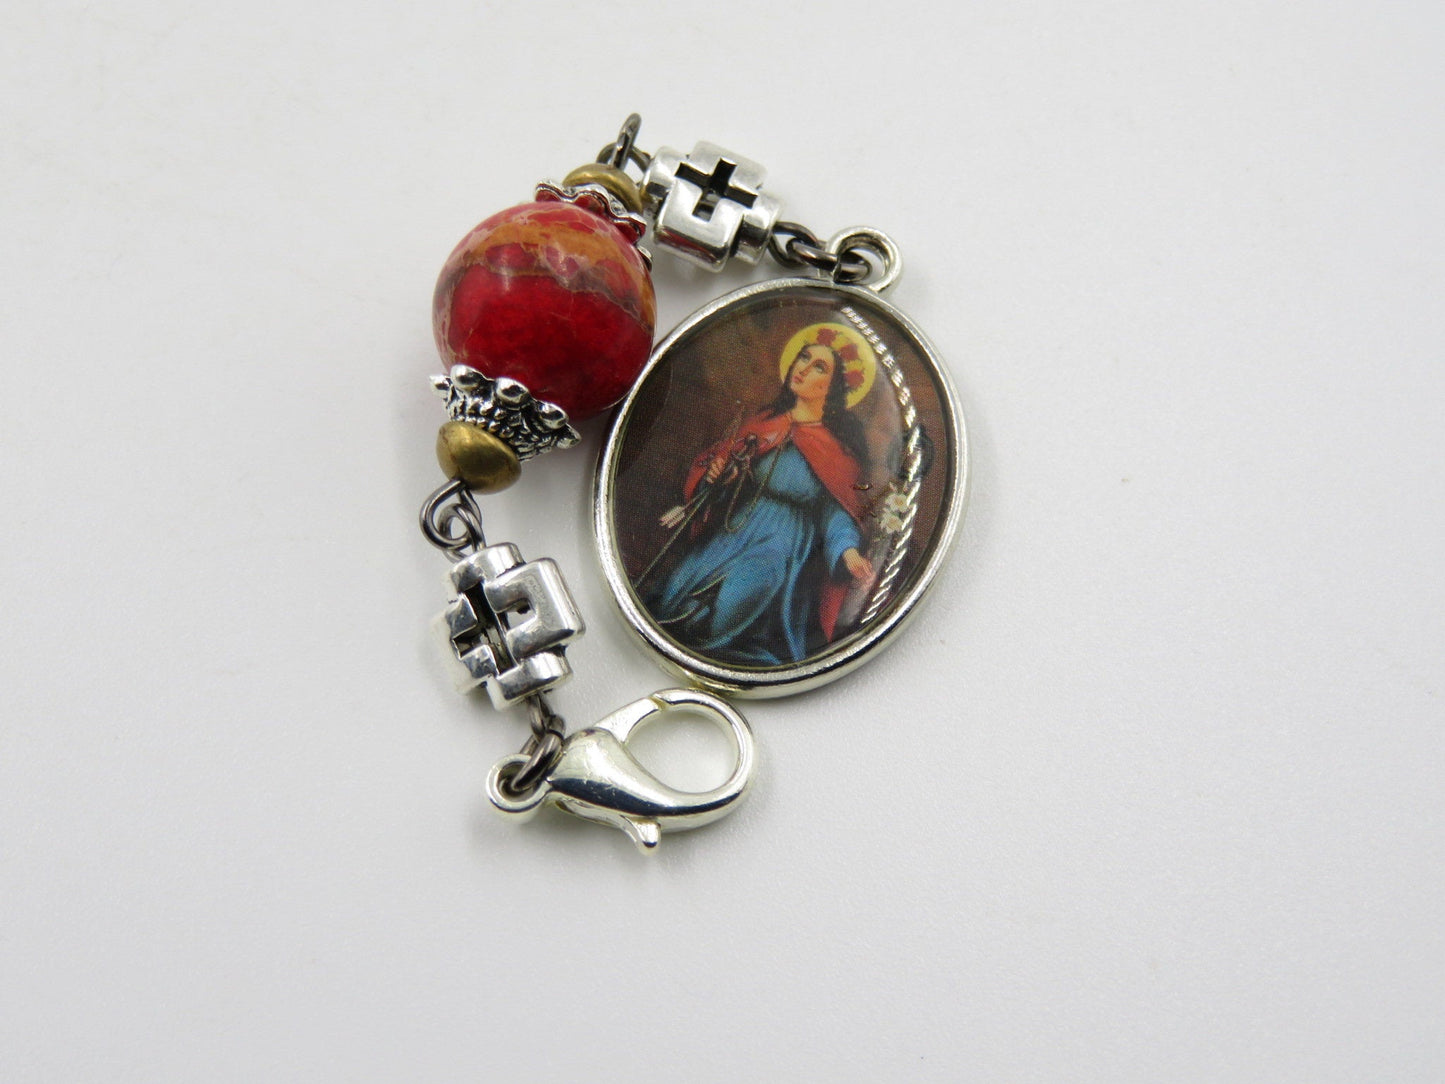 Saint Philomena picture medal purse clip, Religious Key chain medal, Rosary beads, Three Hail Mary bead, prayer beads, Ave Maria beads.